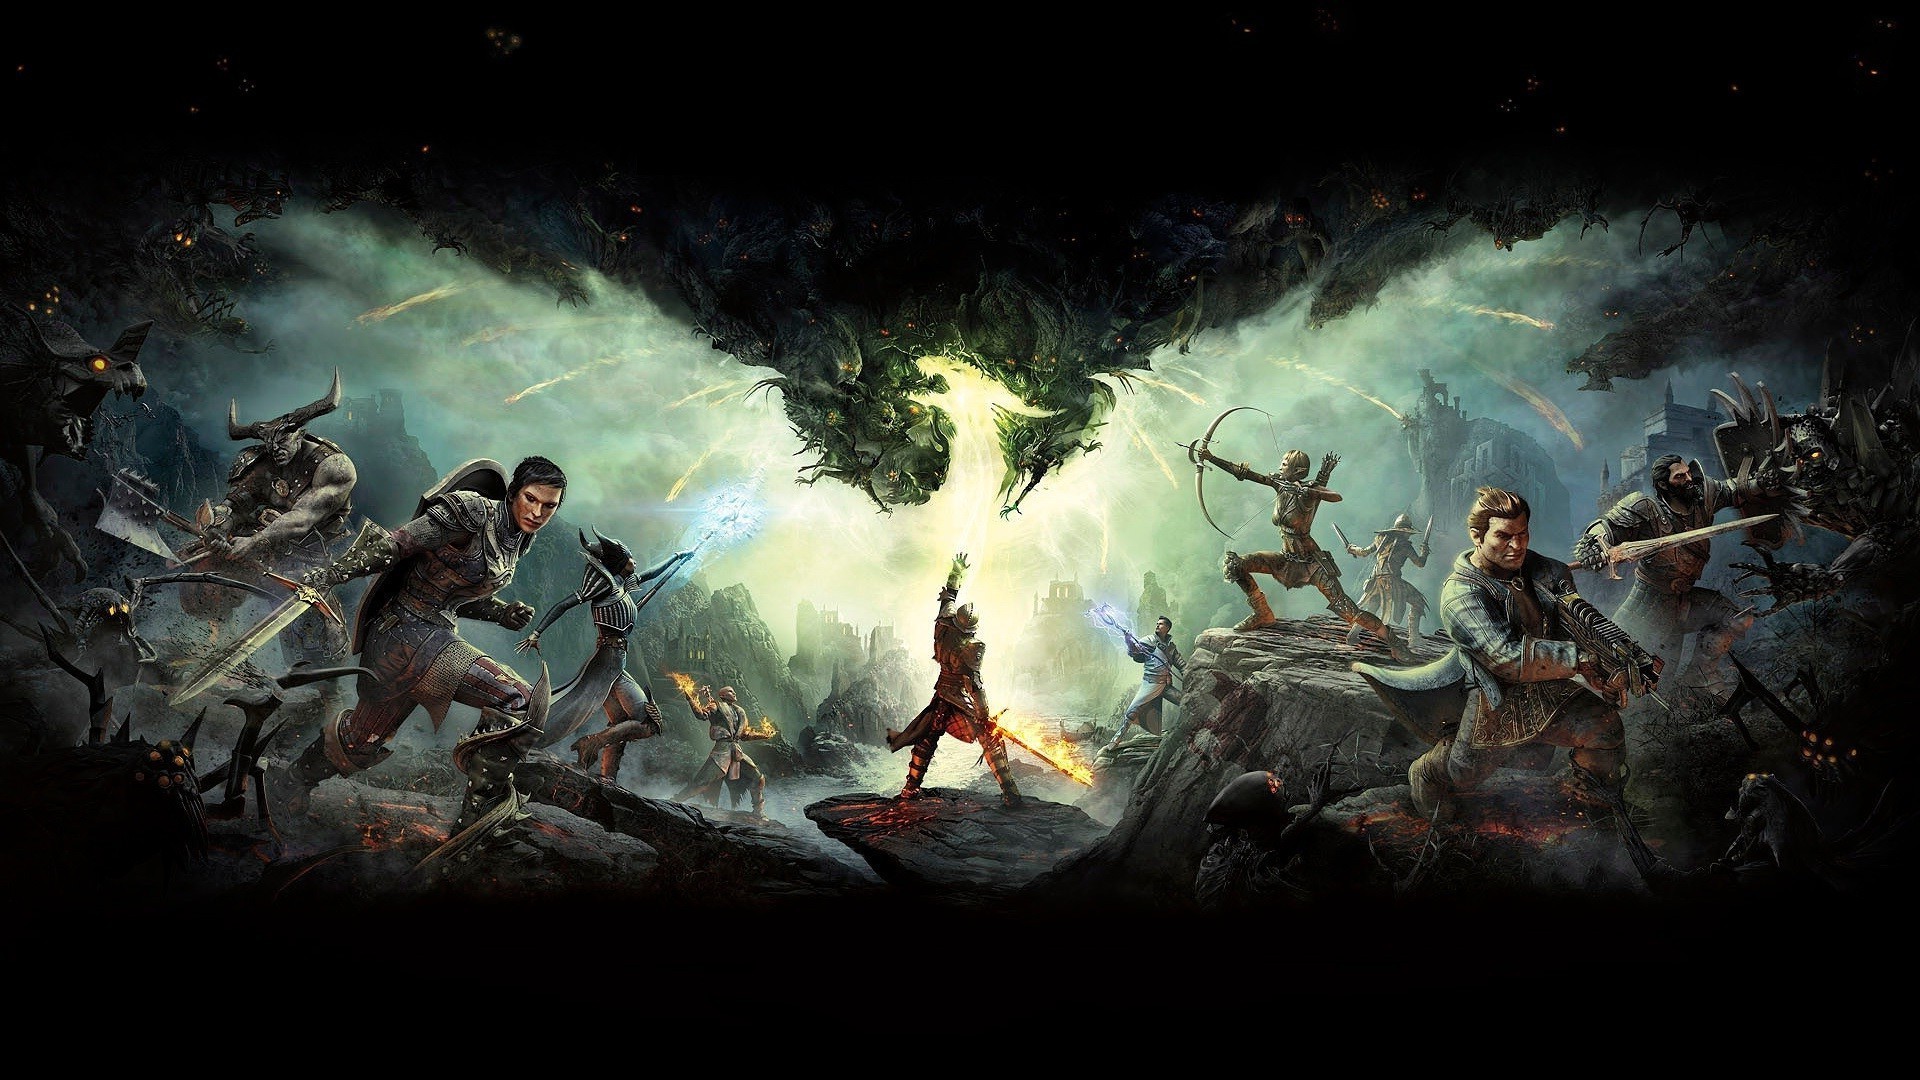 Dragon Age Inquisition wallpapers or desktop backgrounds